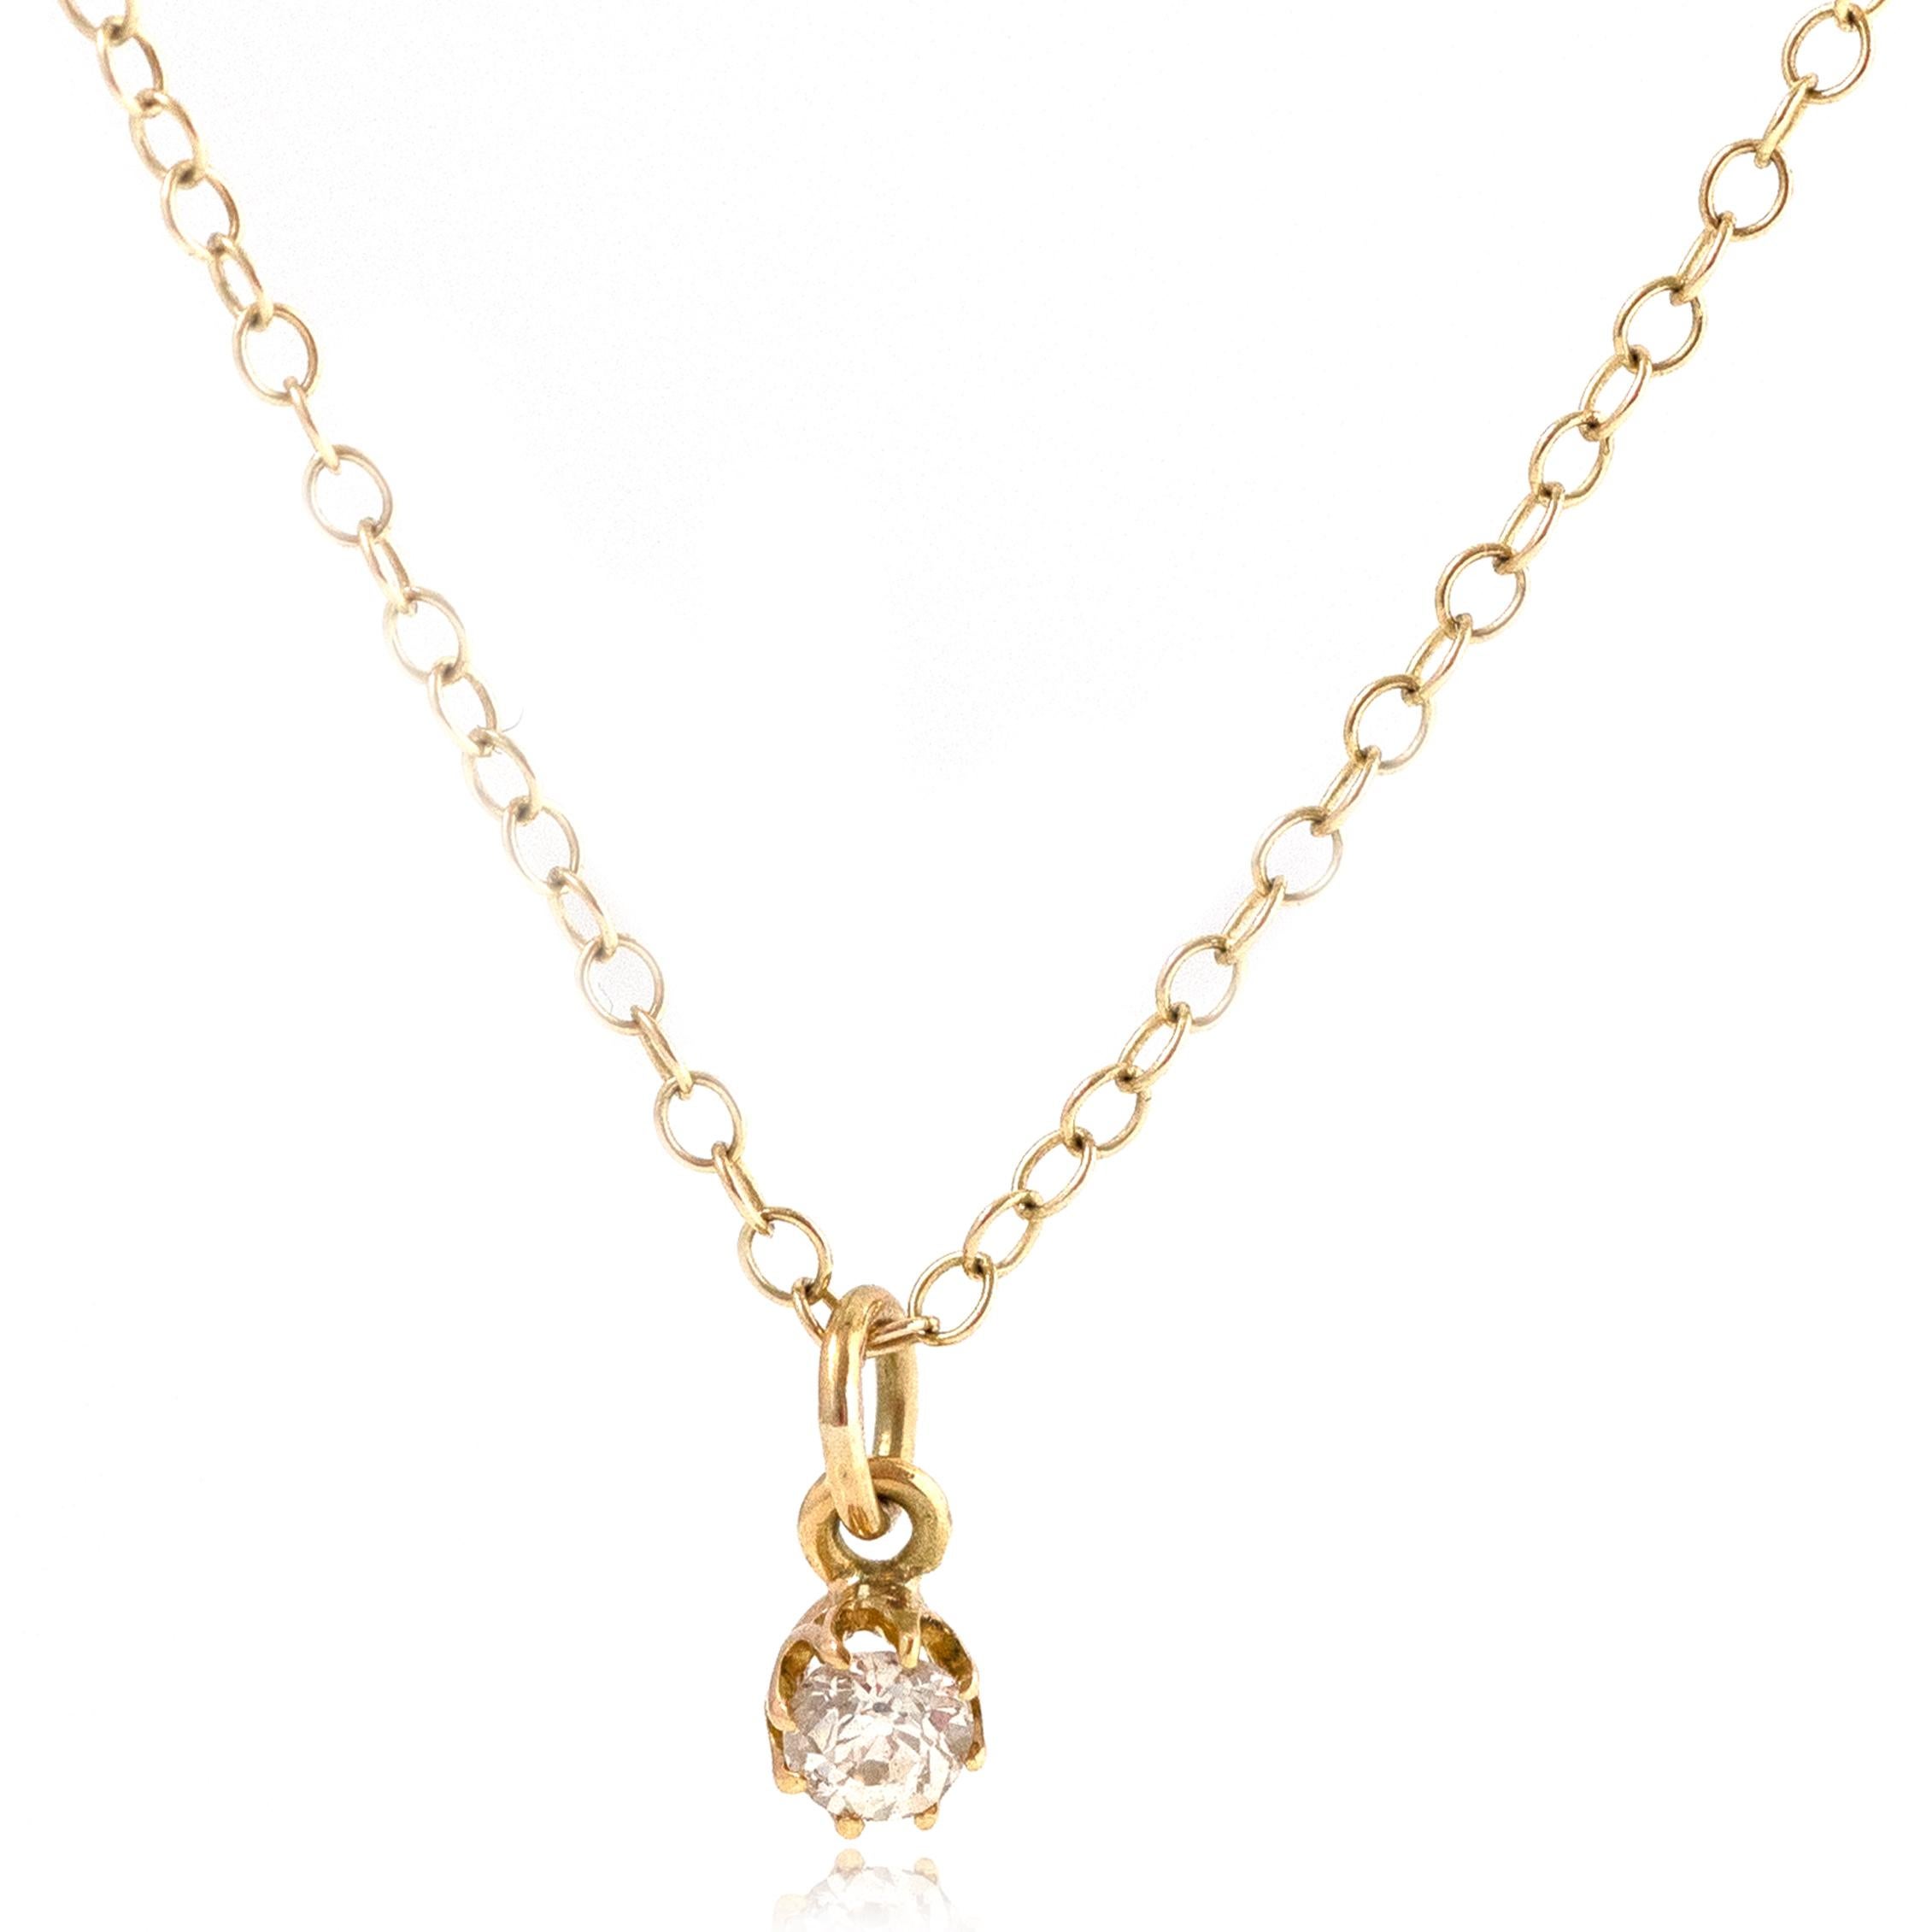 Antique Edwardian 0.25ct Diamond 18ct Gold Necklace In Excellent Condition For Sale In London, GB